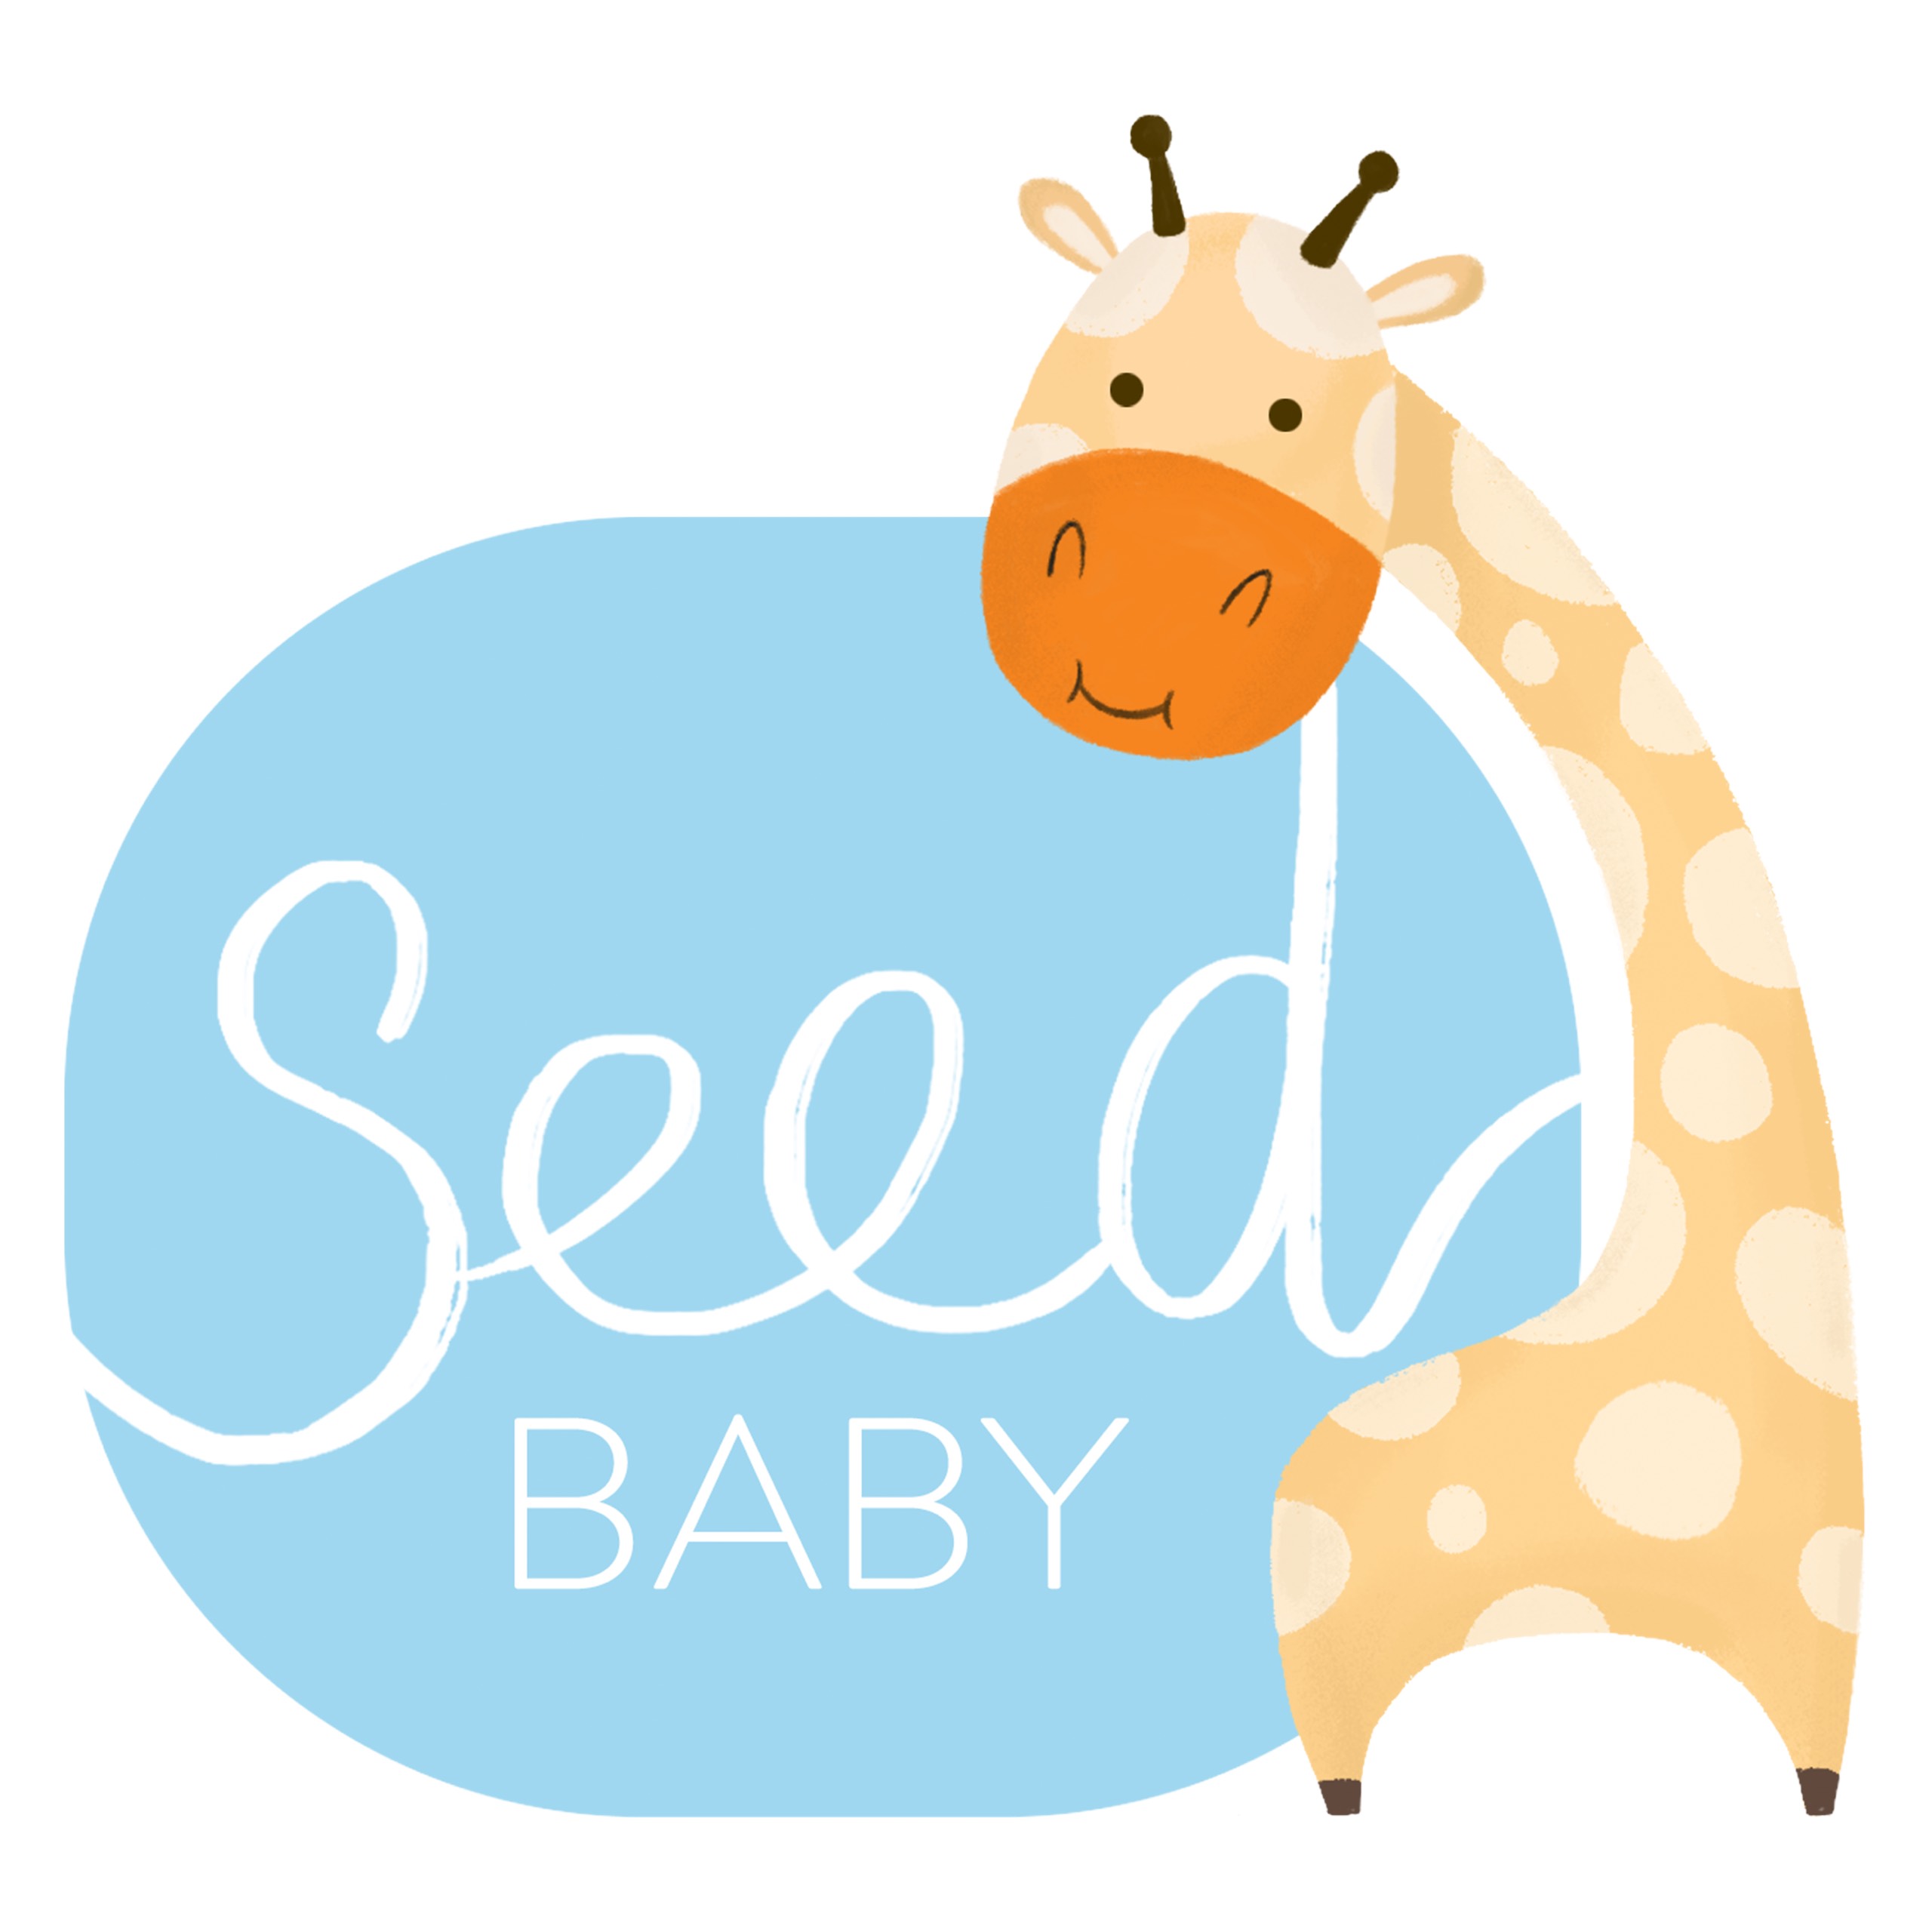 Seed Baby